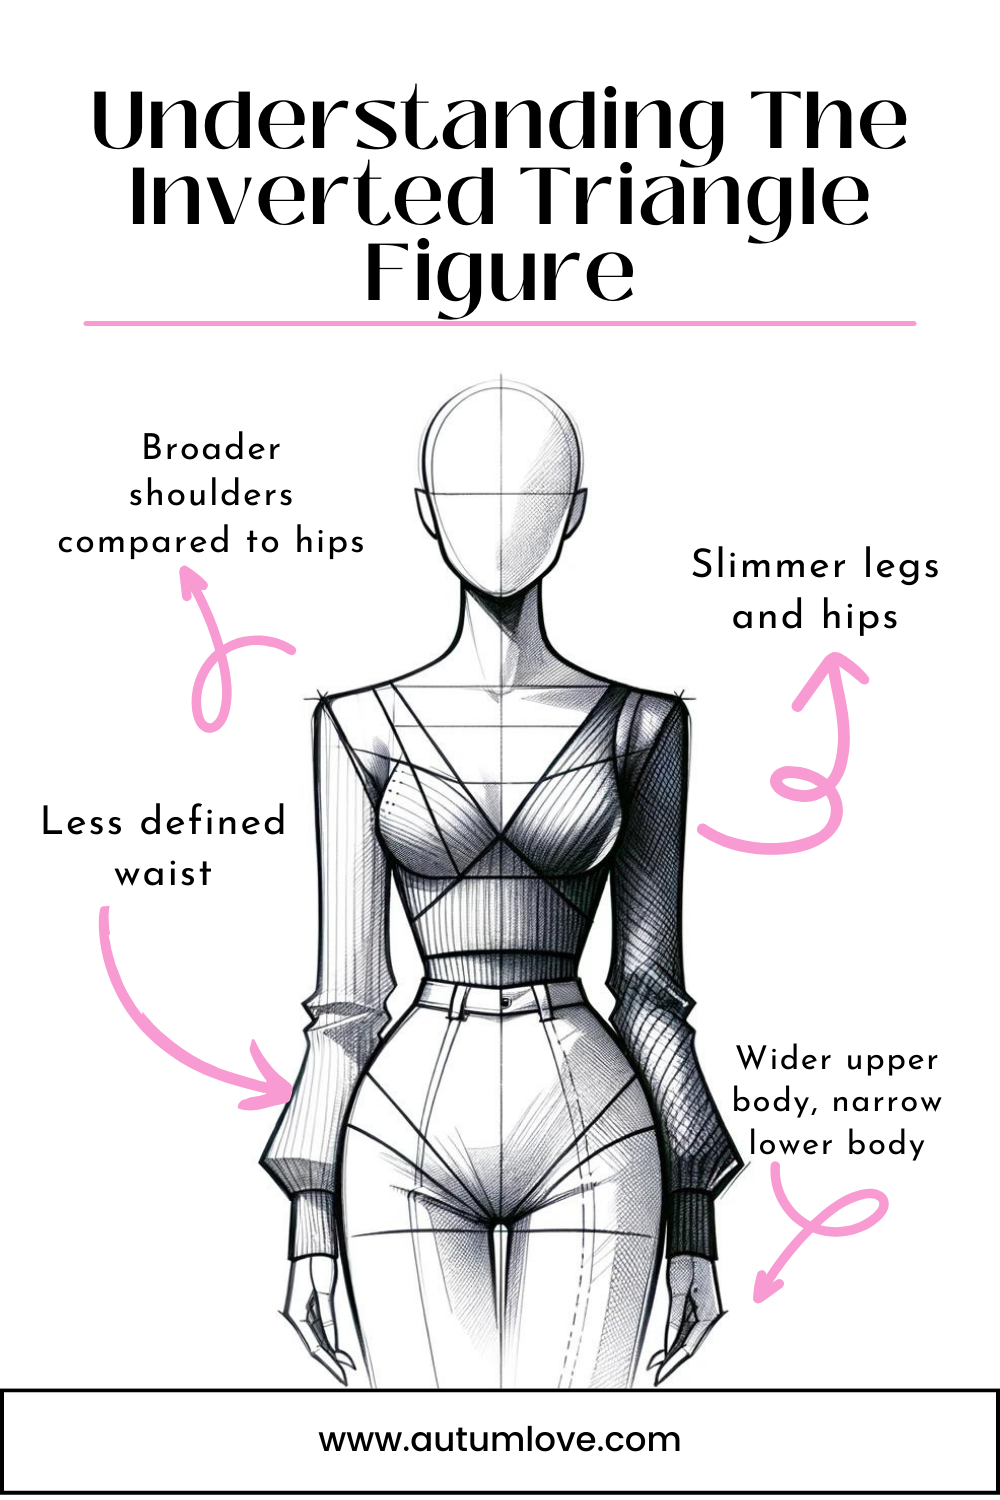 Best Ways To Enhance The Inverted Triangle Body Shape - Color Me